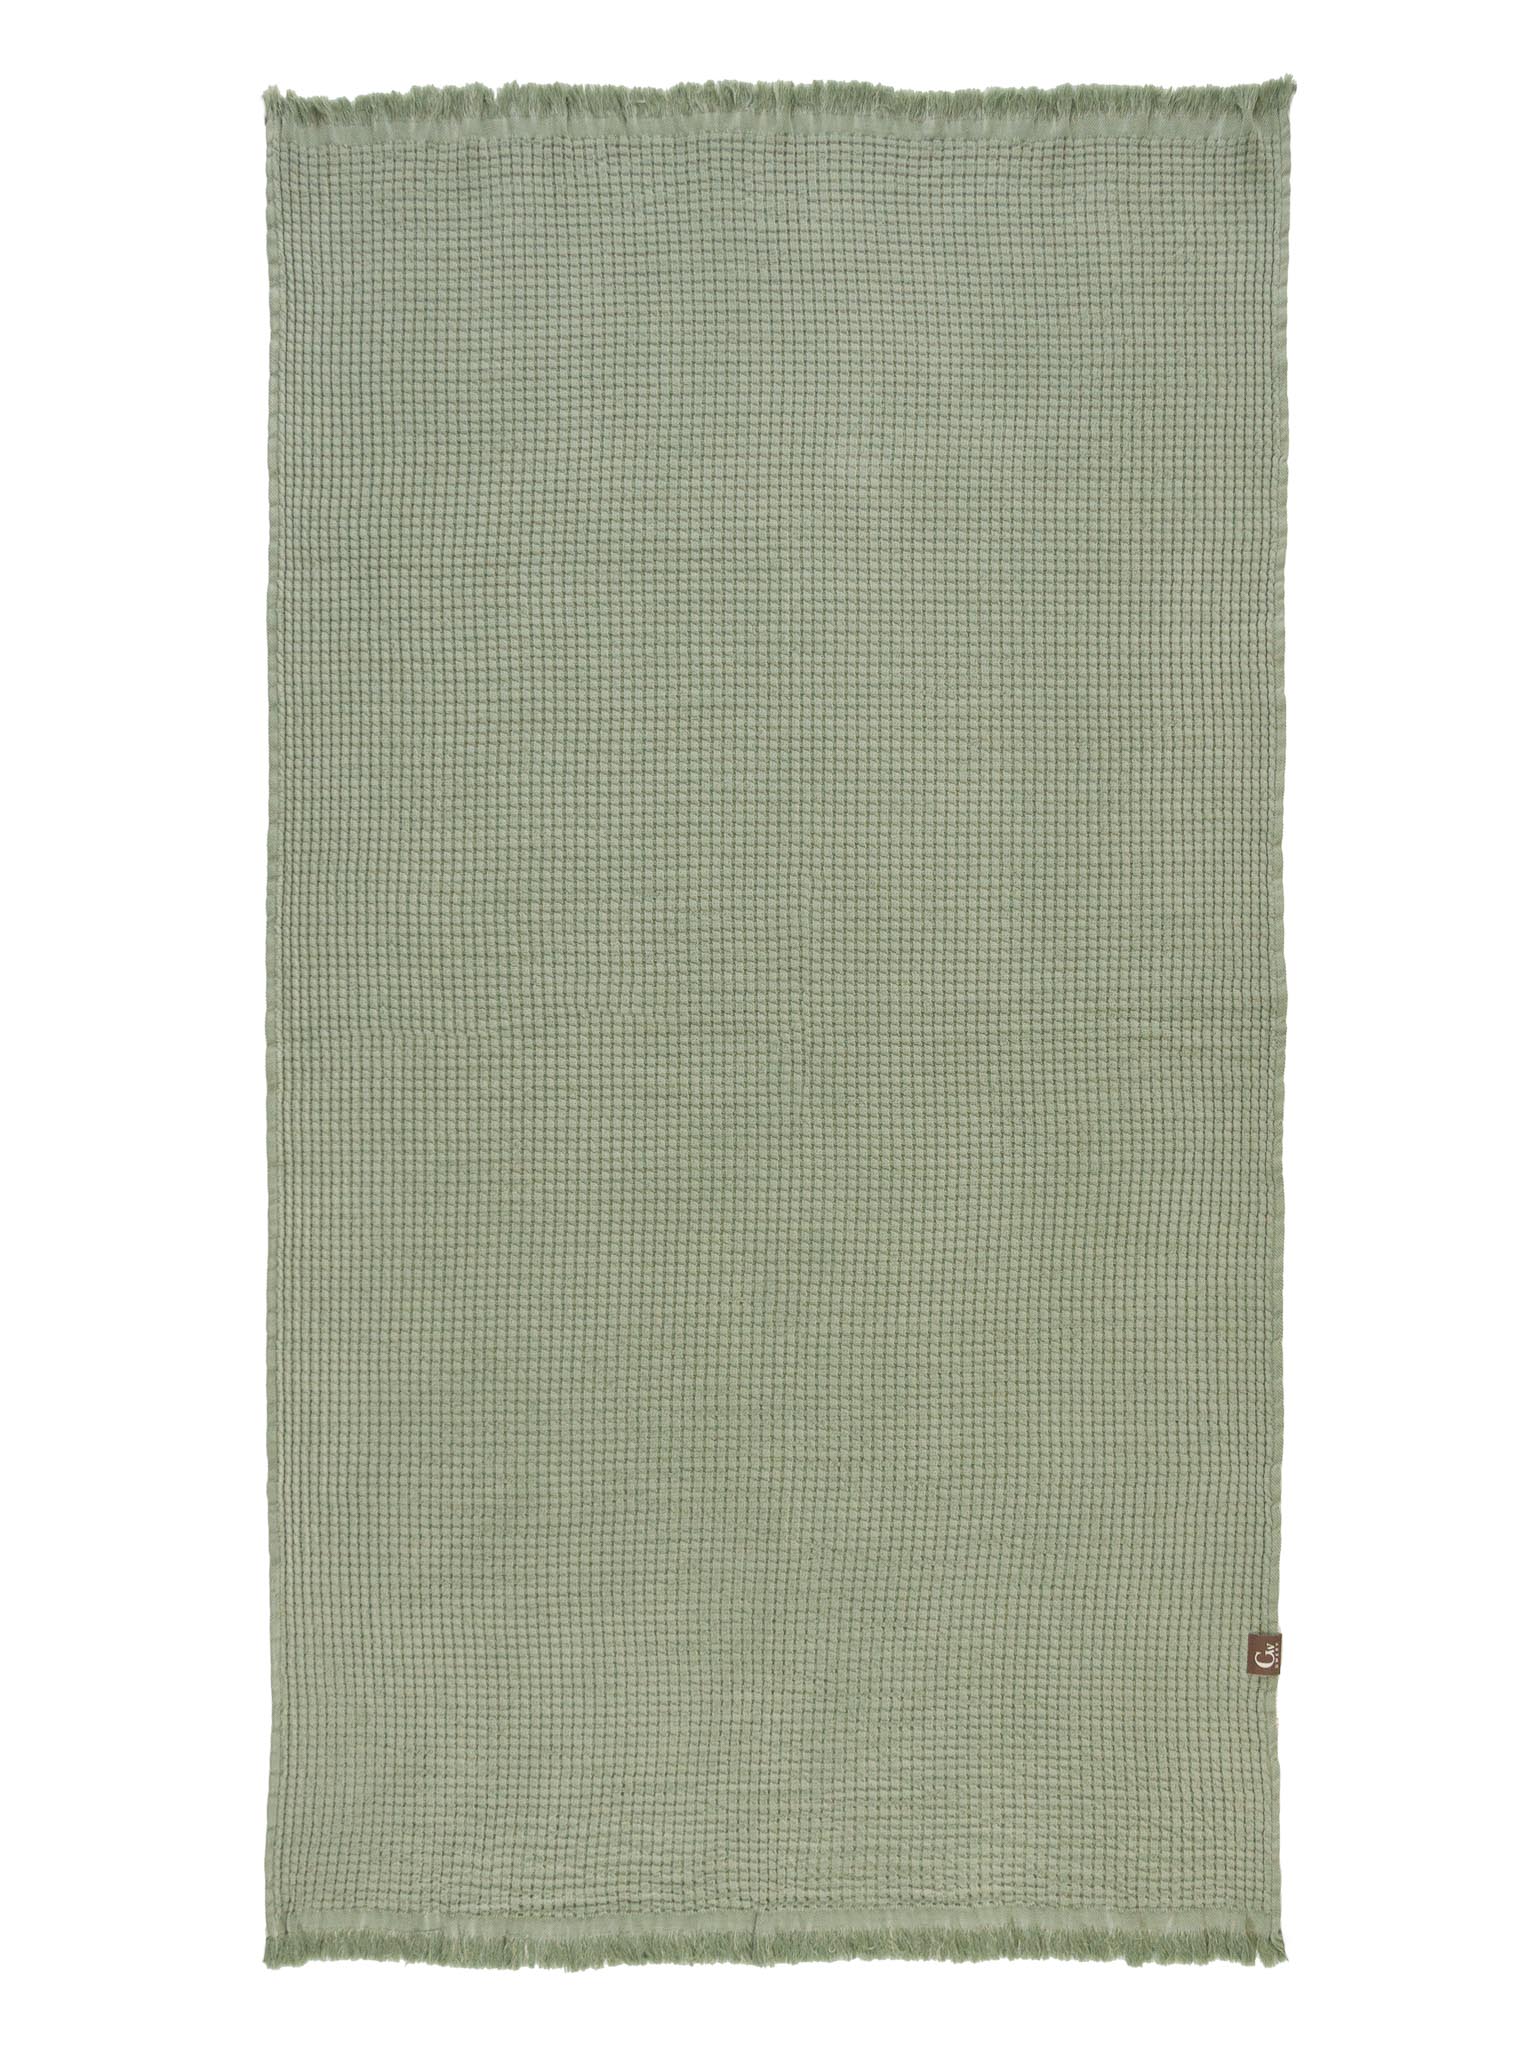 Green double sided, honeycomb beach towel open up